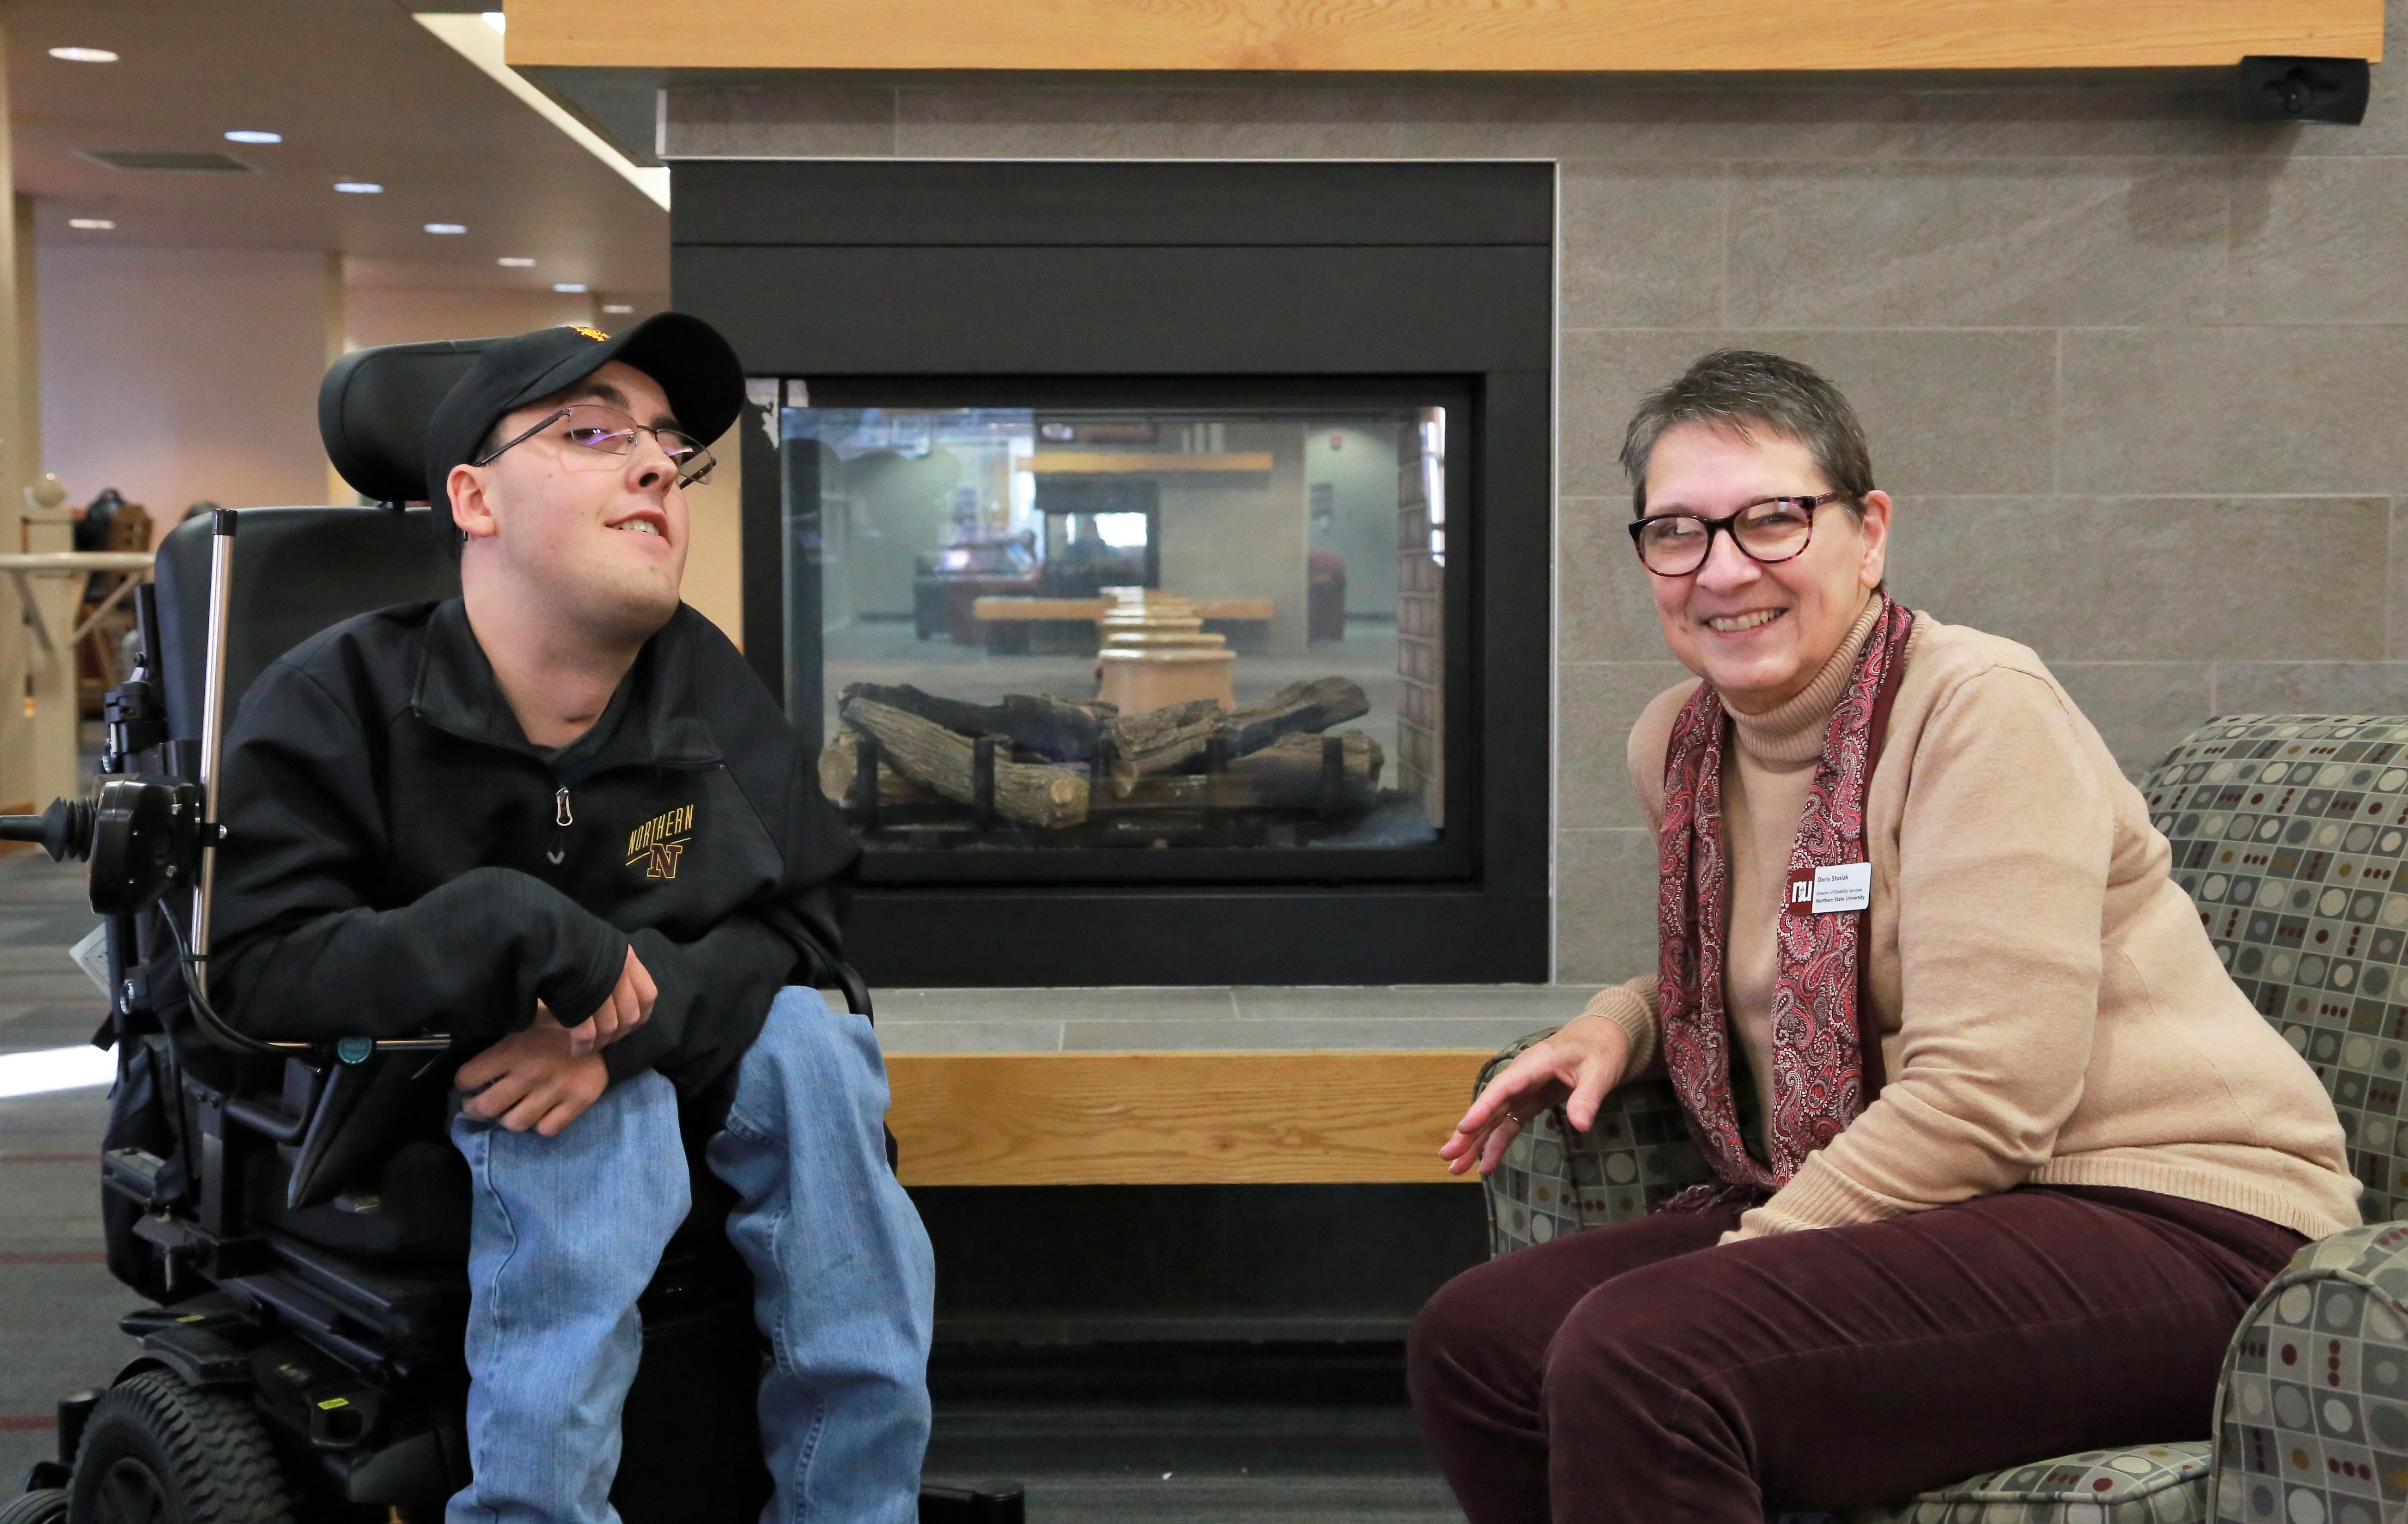 Student and employee near fireplace in student center